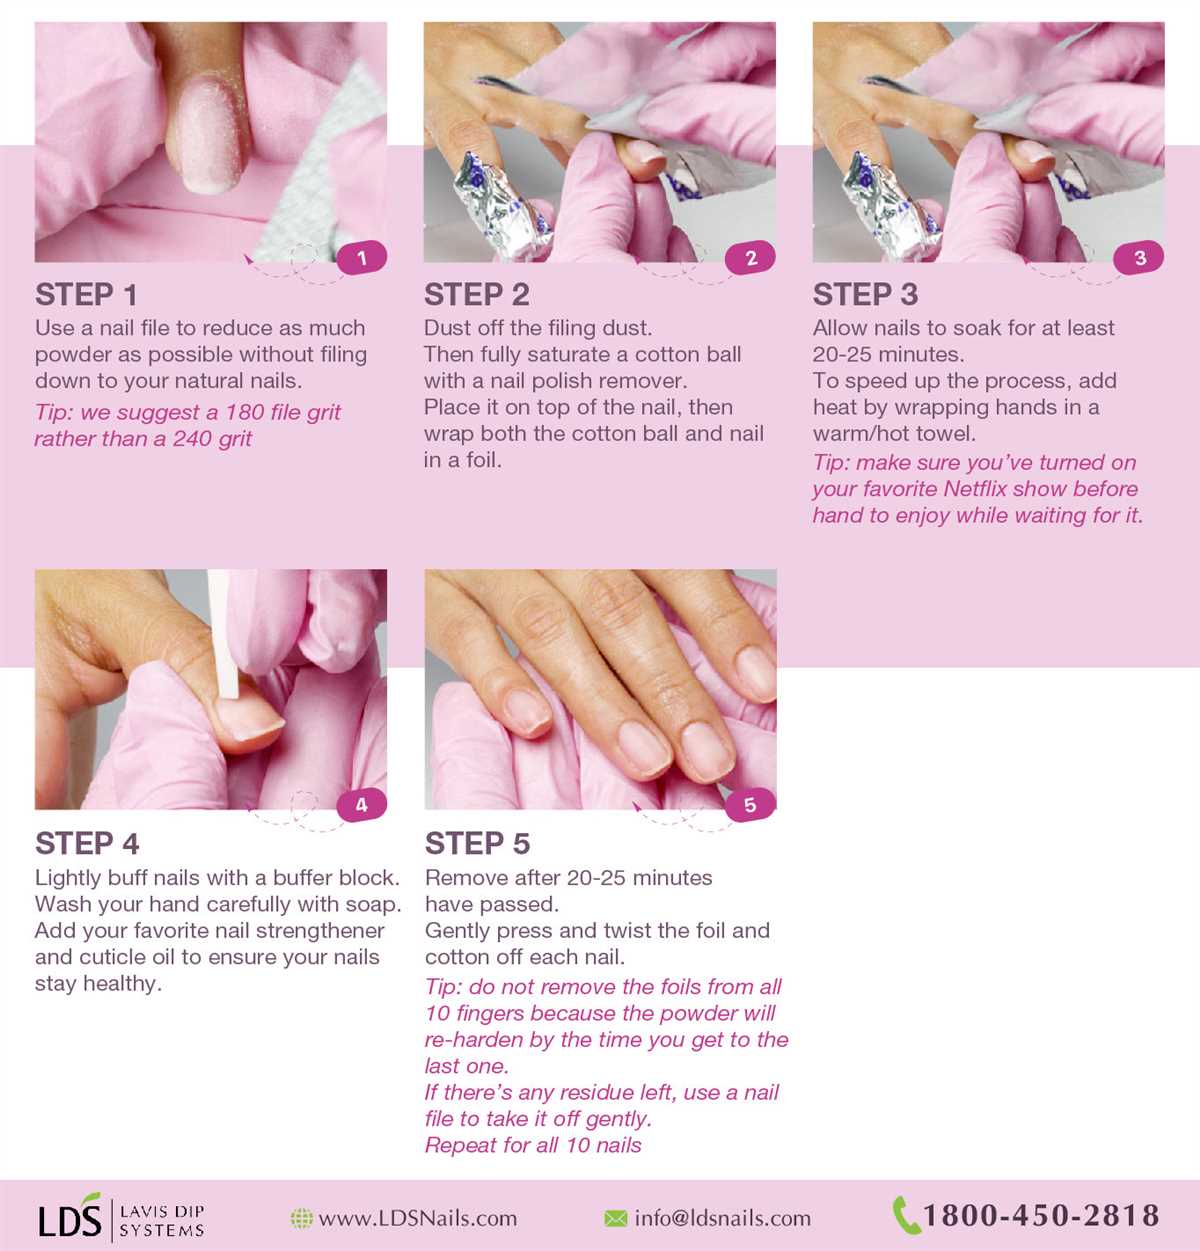 5. File the top layer of your dip nails